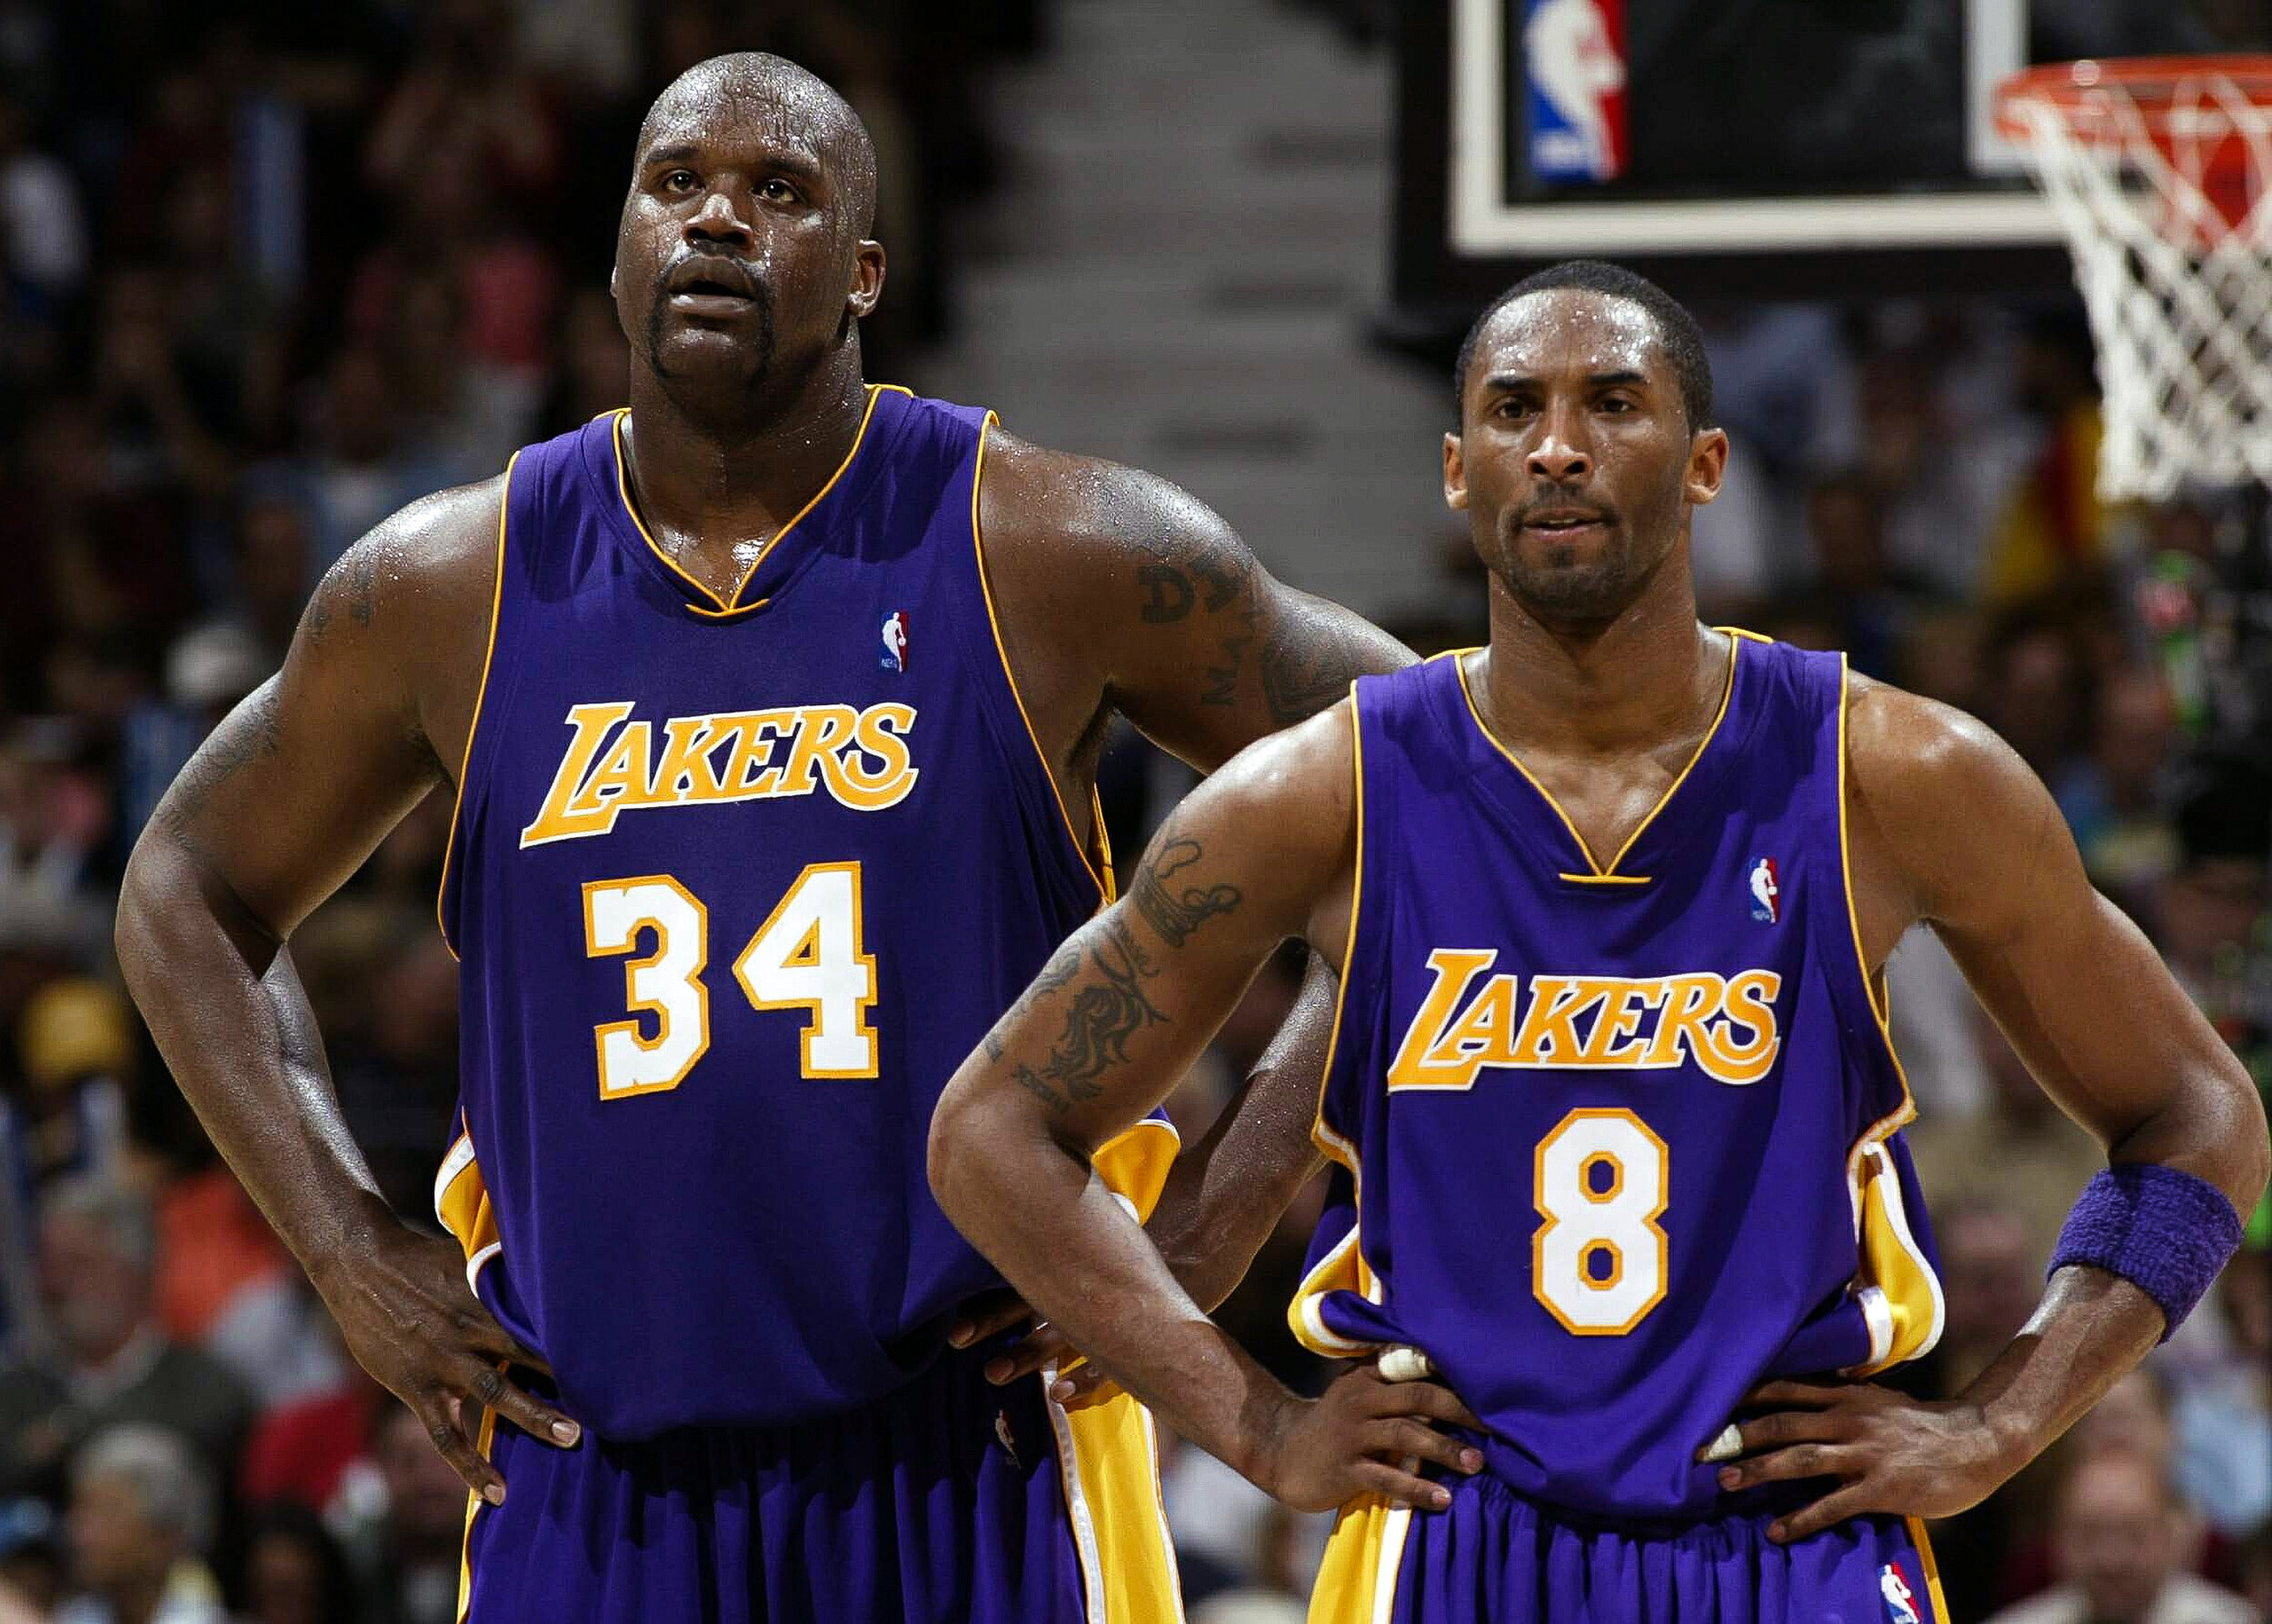  Shaquille O'Neal and Kobe Bryant   Western Conference Finals | NBA Playoffs, 2004 